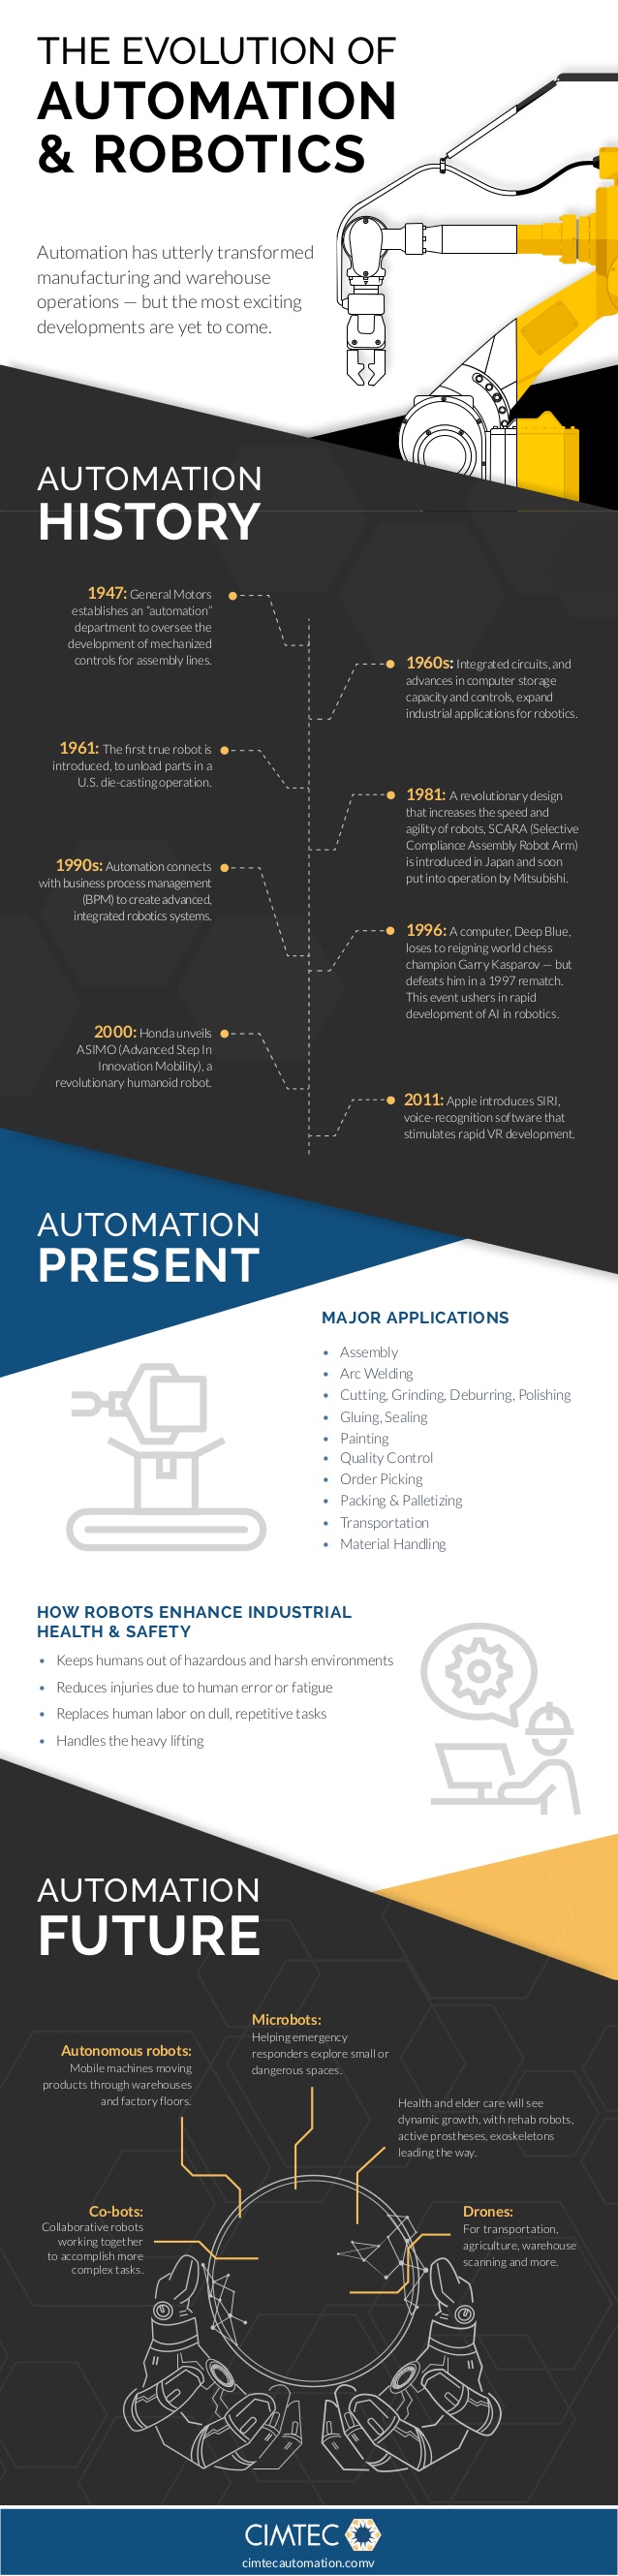 history of automation to present day